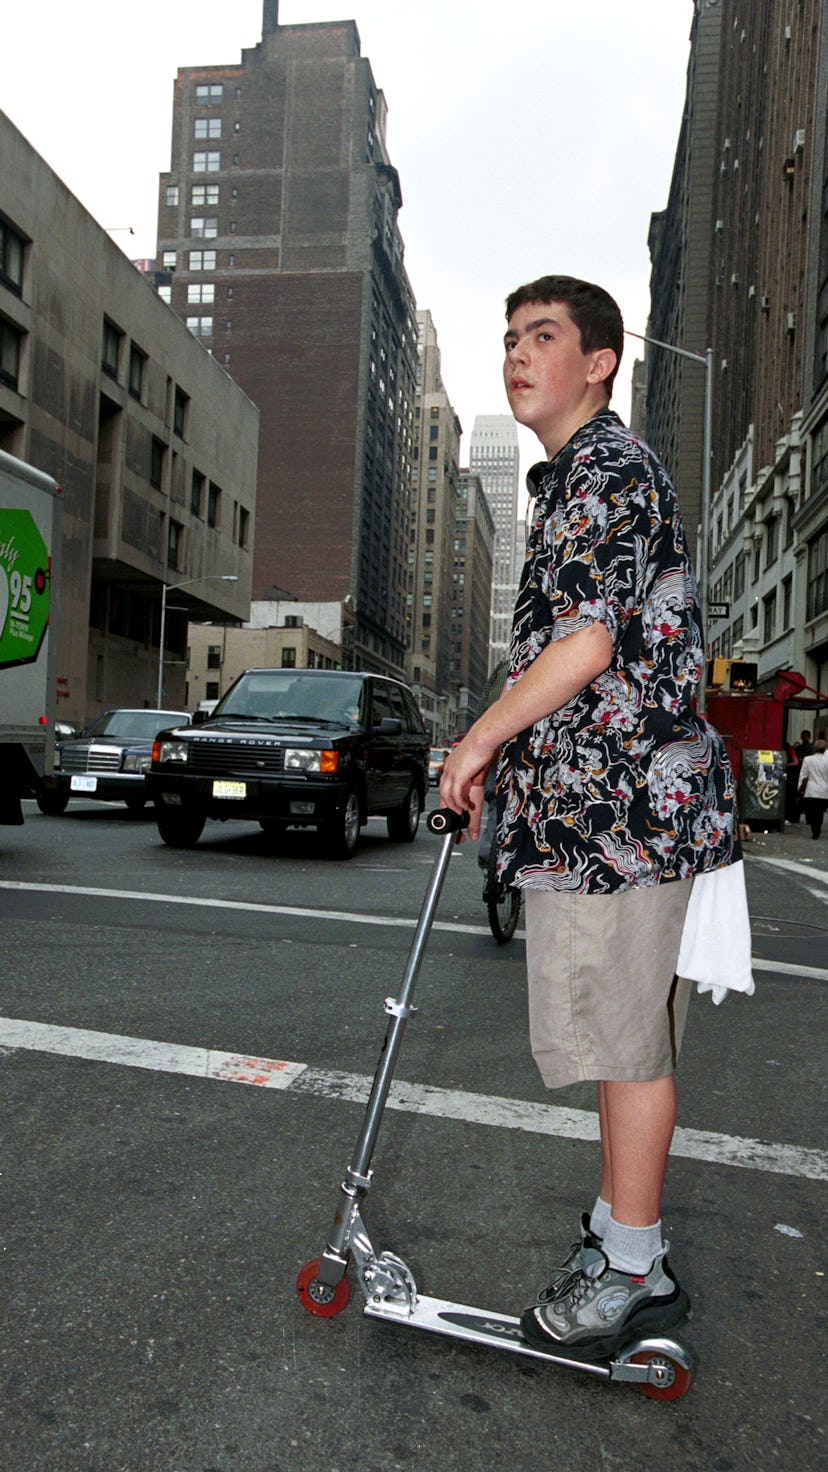 370397 03: Jake Smith, 16, of Queens rides his Razor Scooter June 1, 2000 in Manhattan, NY. The Razo...